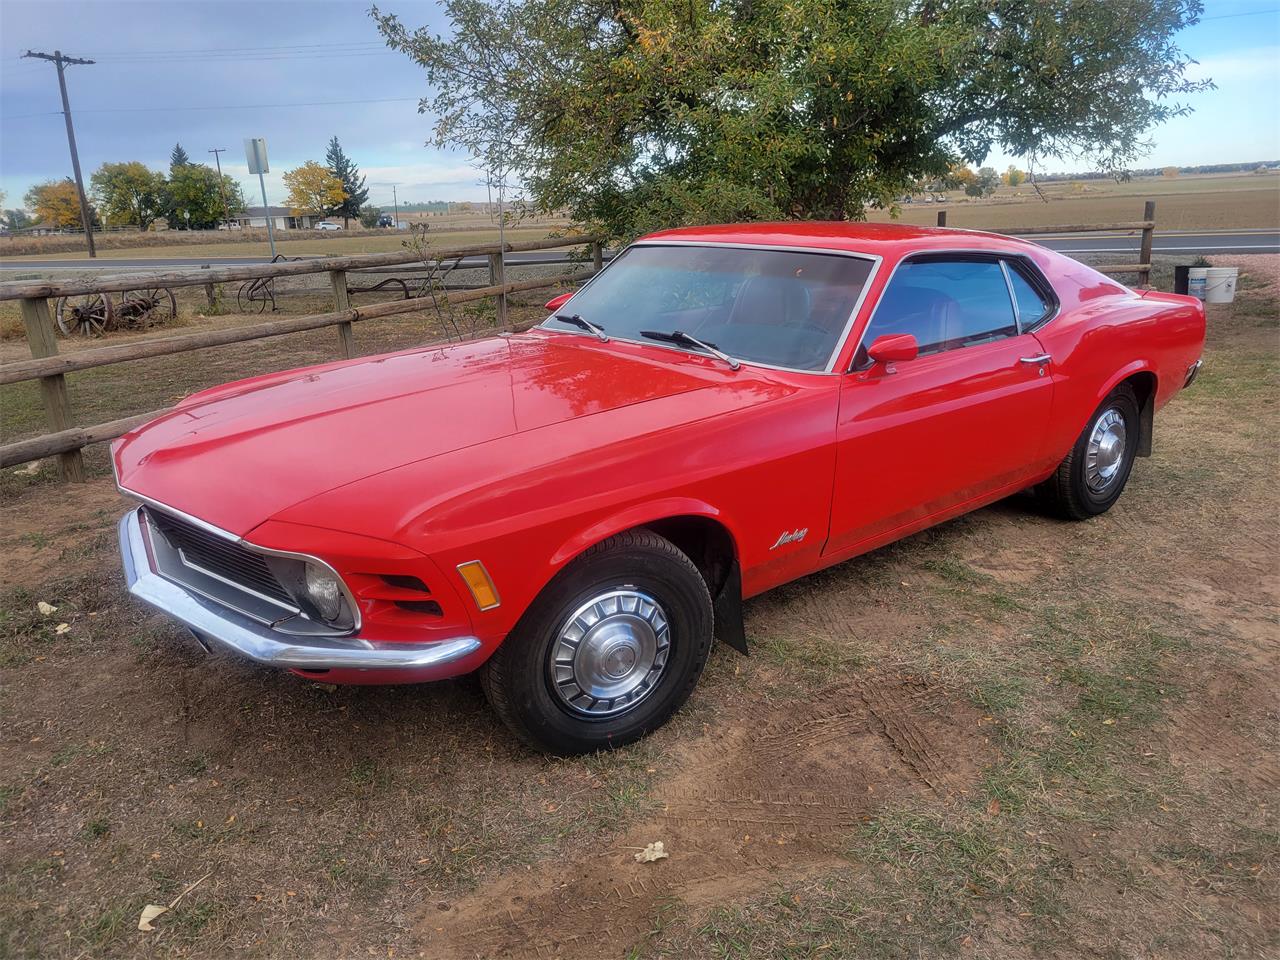 Pick of the Day: 1970 Ford Mustang SportsRoof | ClassicCars.com Journal